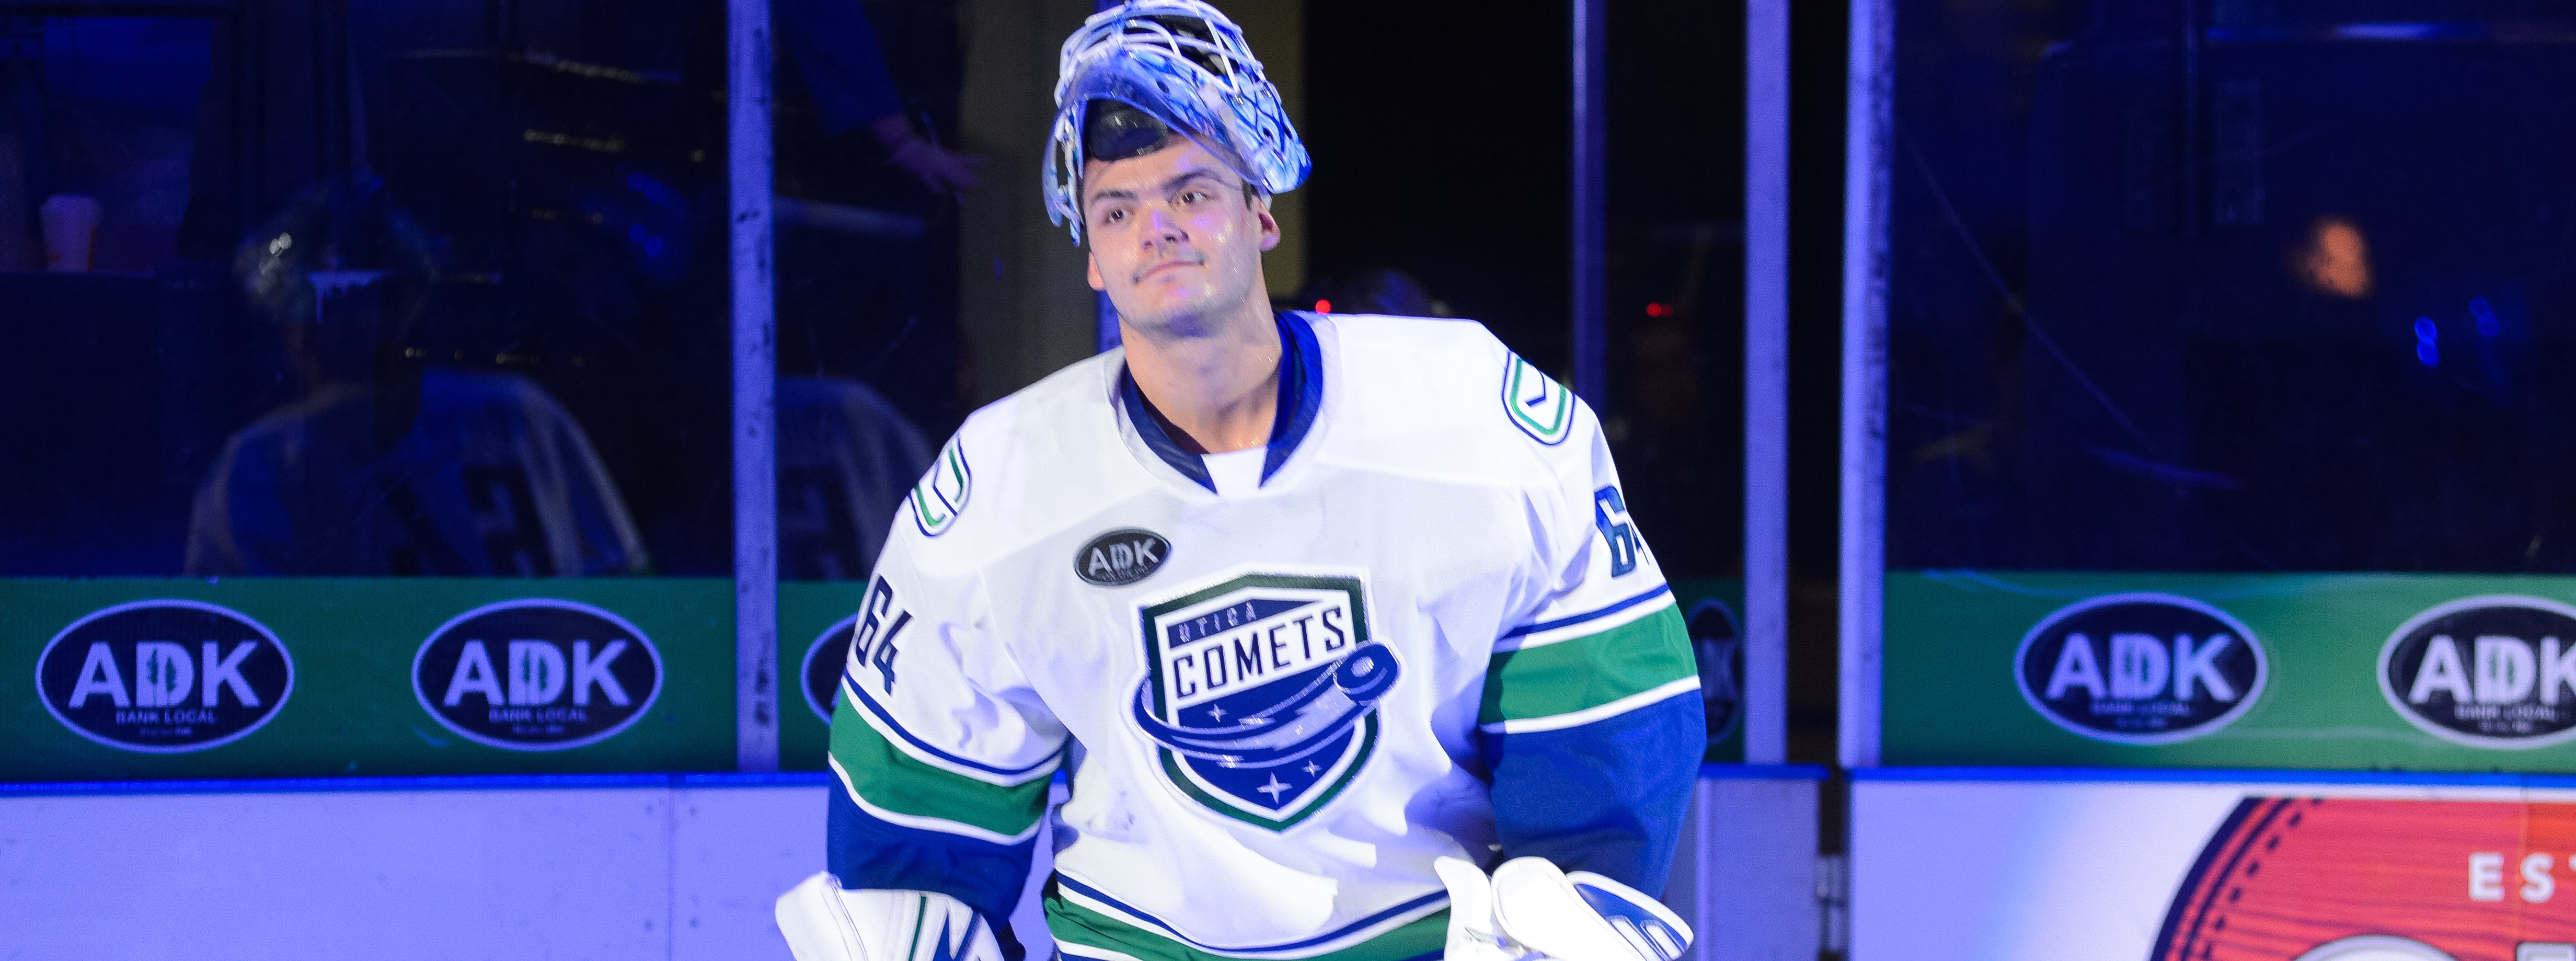 BREAKING THE ICE: MIKEY DIPIETRO